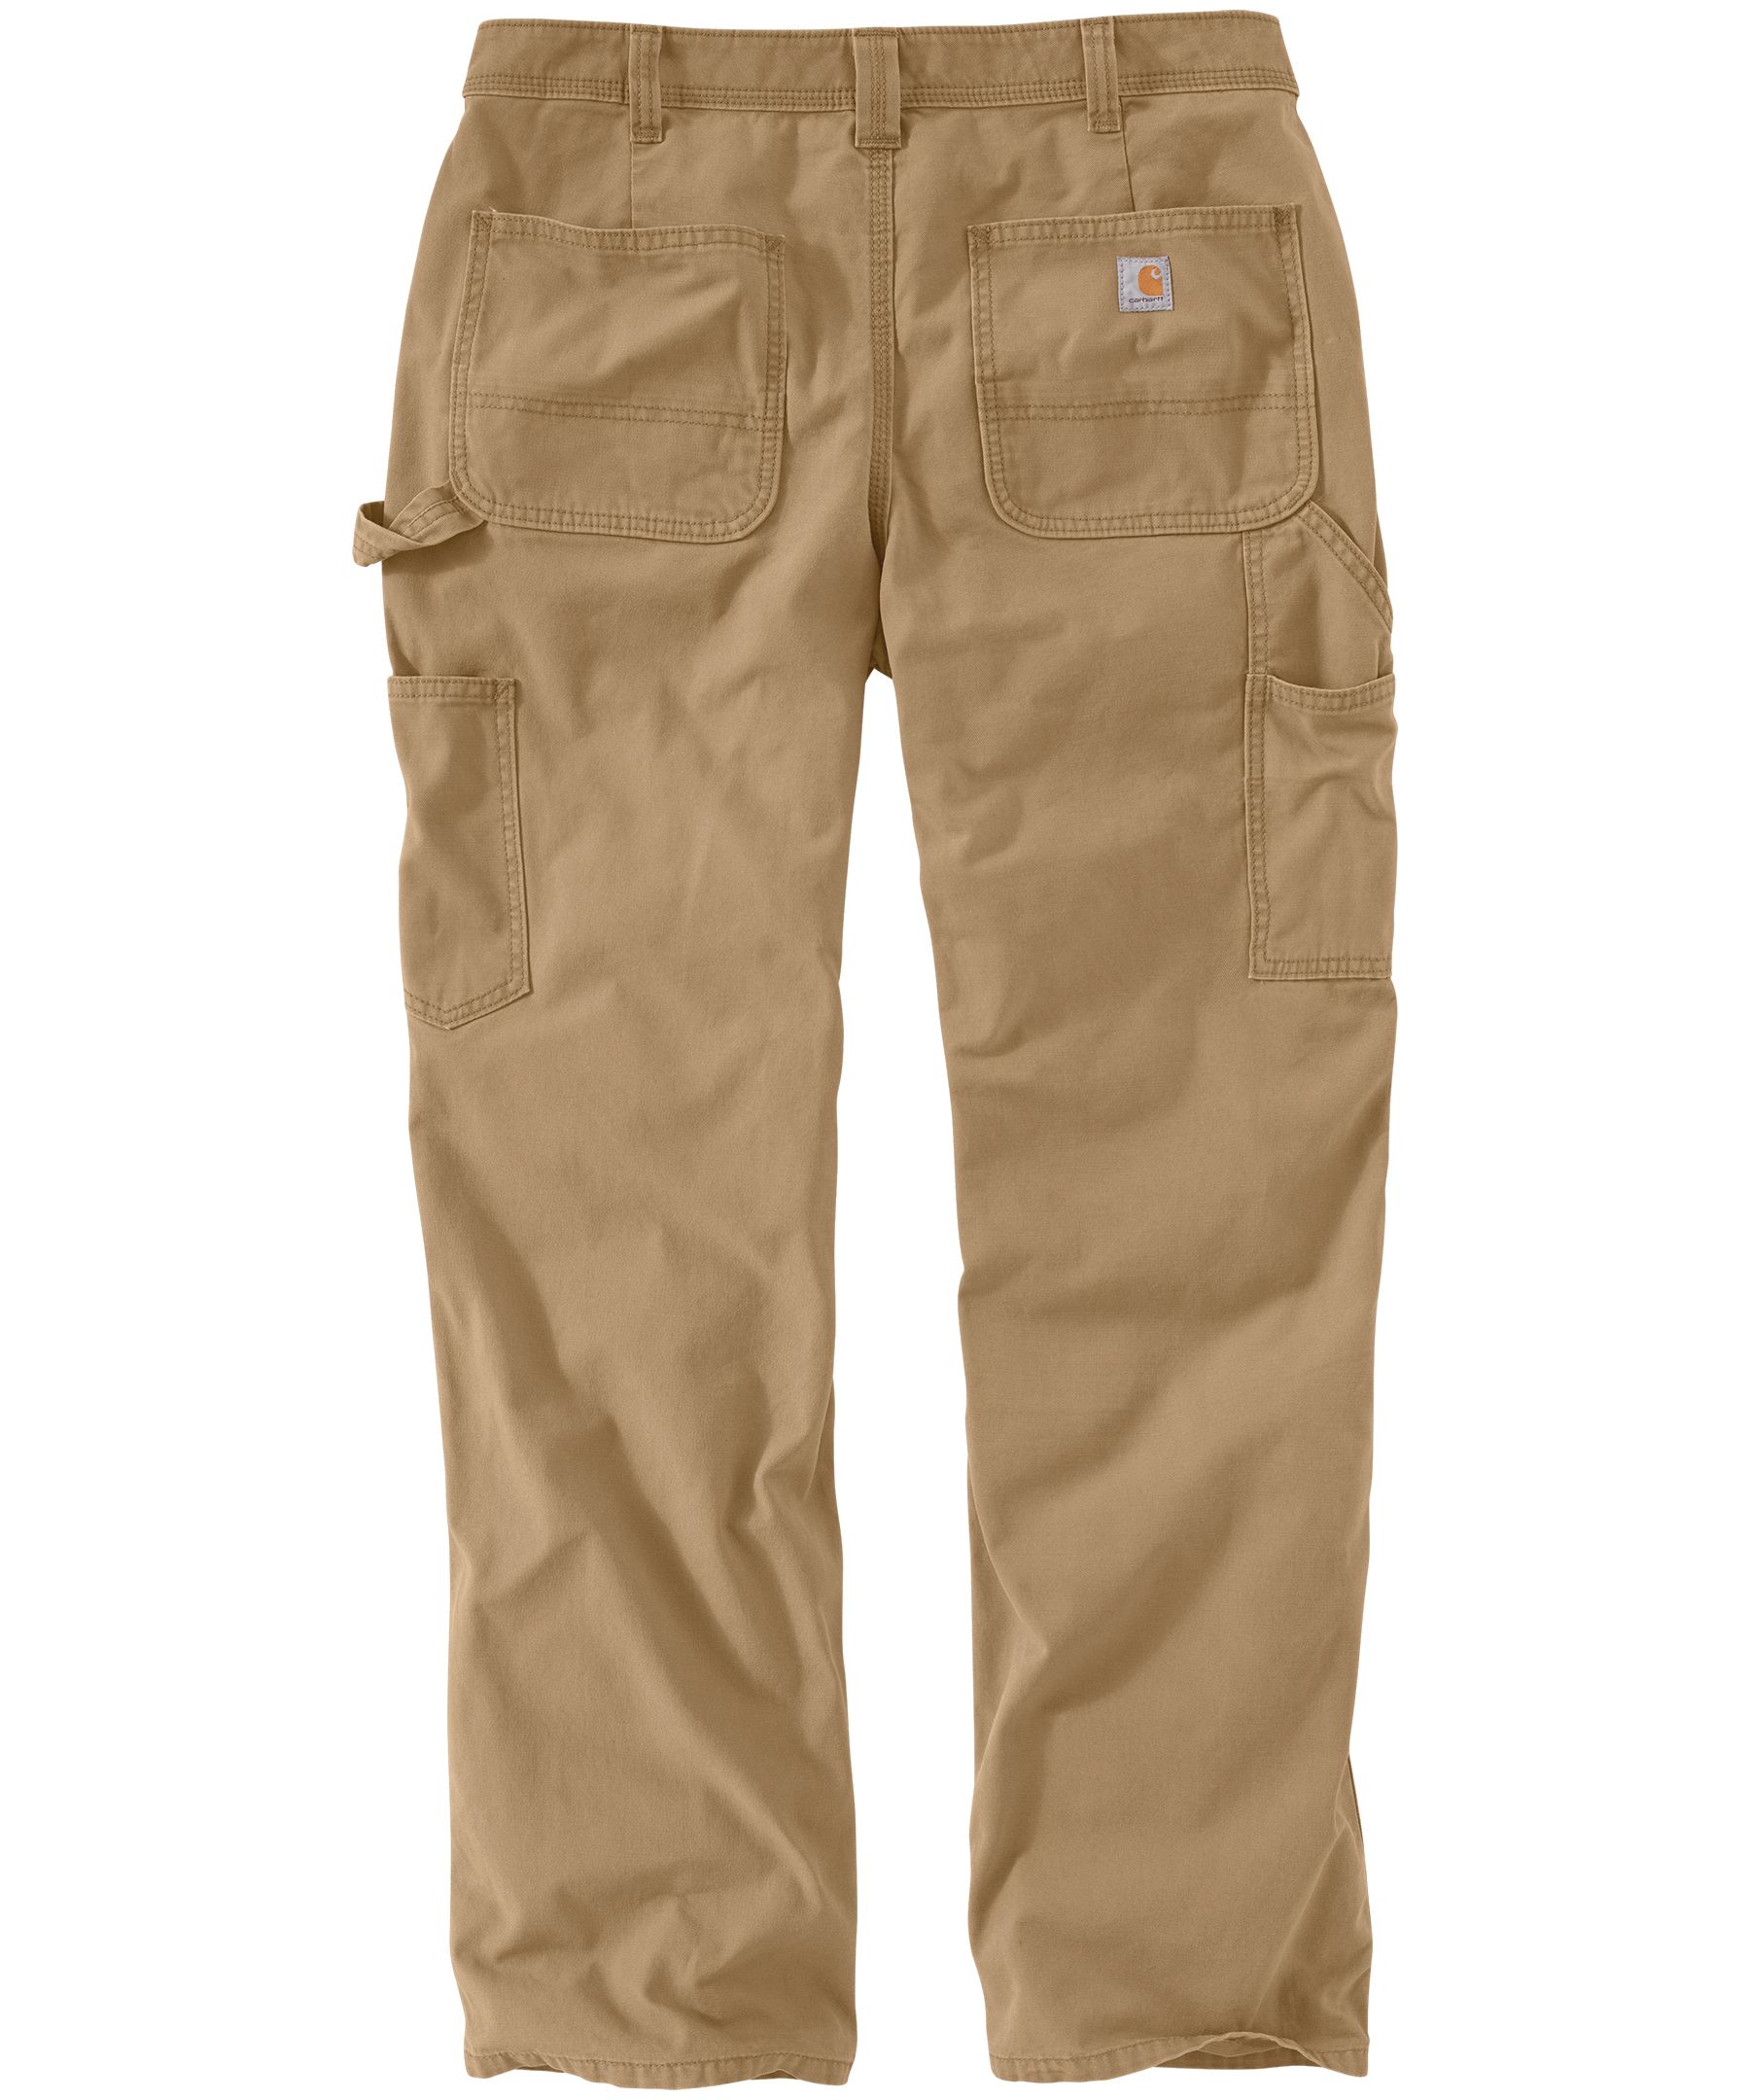 Carhartt Women's Mid Rise Relaxed Fit Double Front Canvas Work Pants